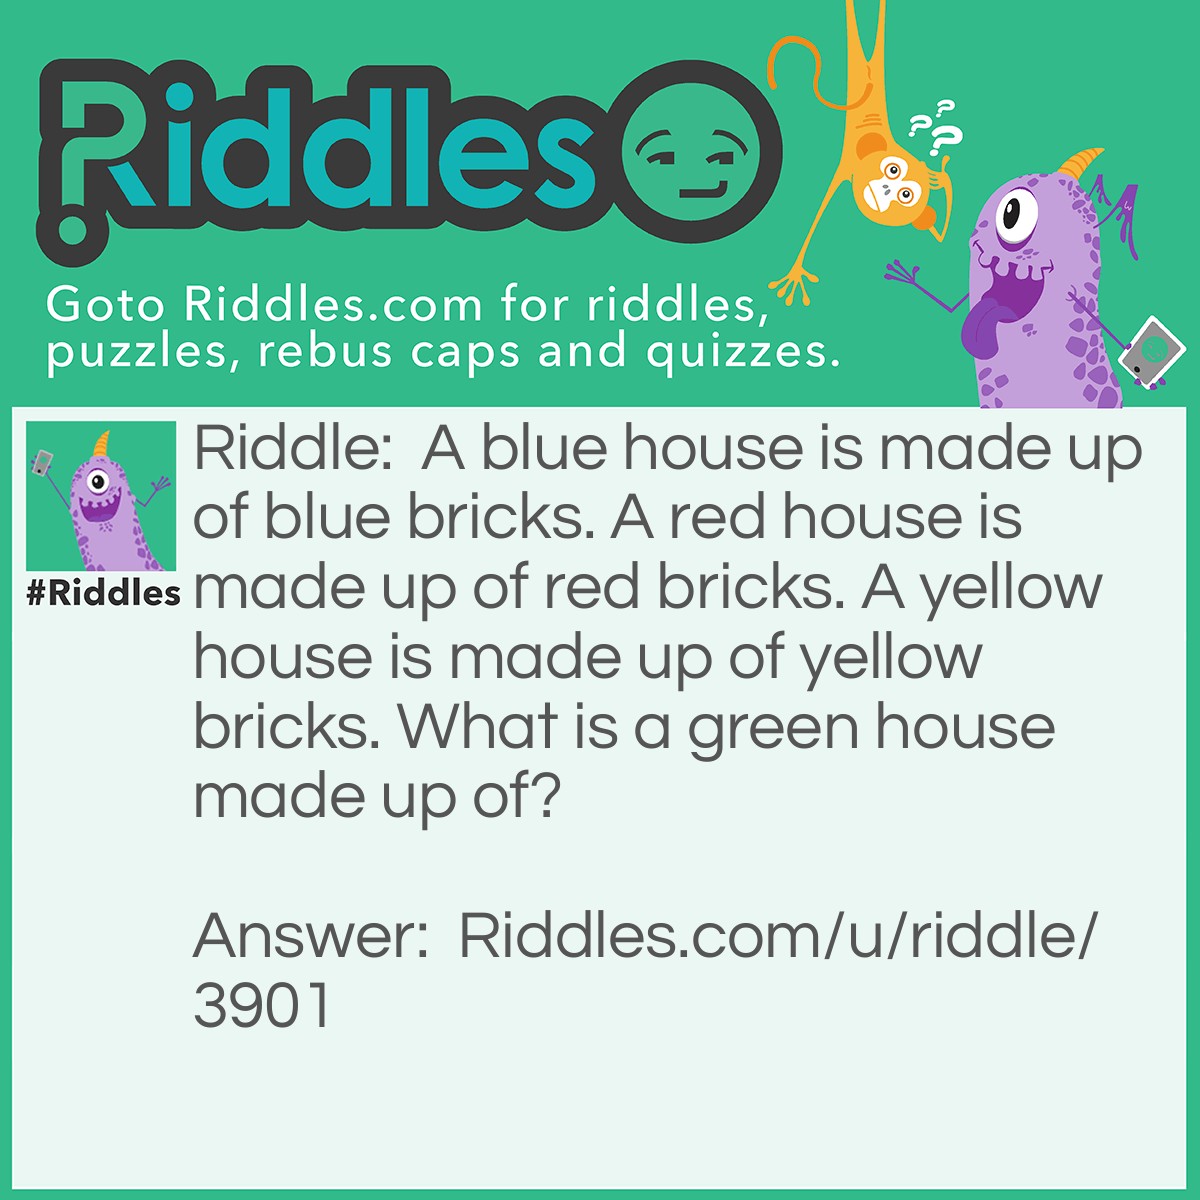 Riddle: A blue house is made up of blue bricks. A red house is made up of red bricks. A yellow house is made up of yellow bricks. What is a green house made up of? Answer: Plants!